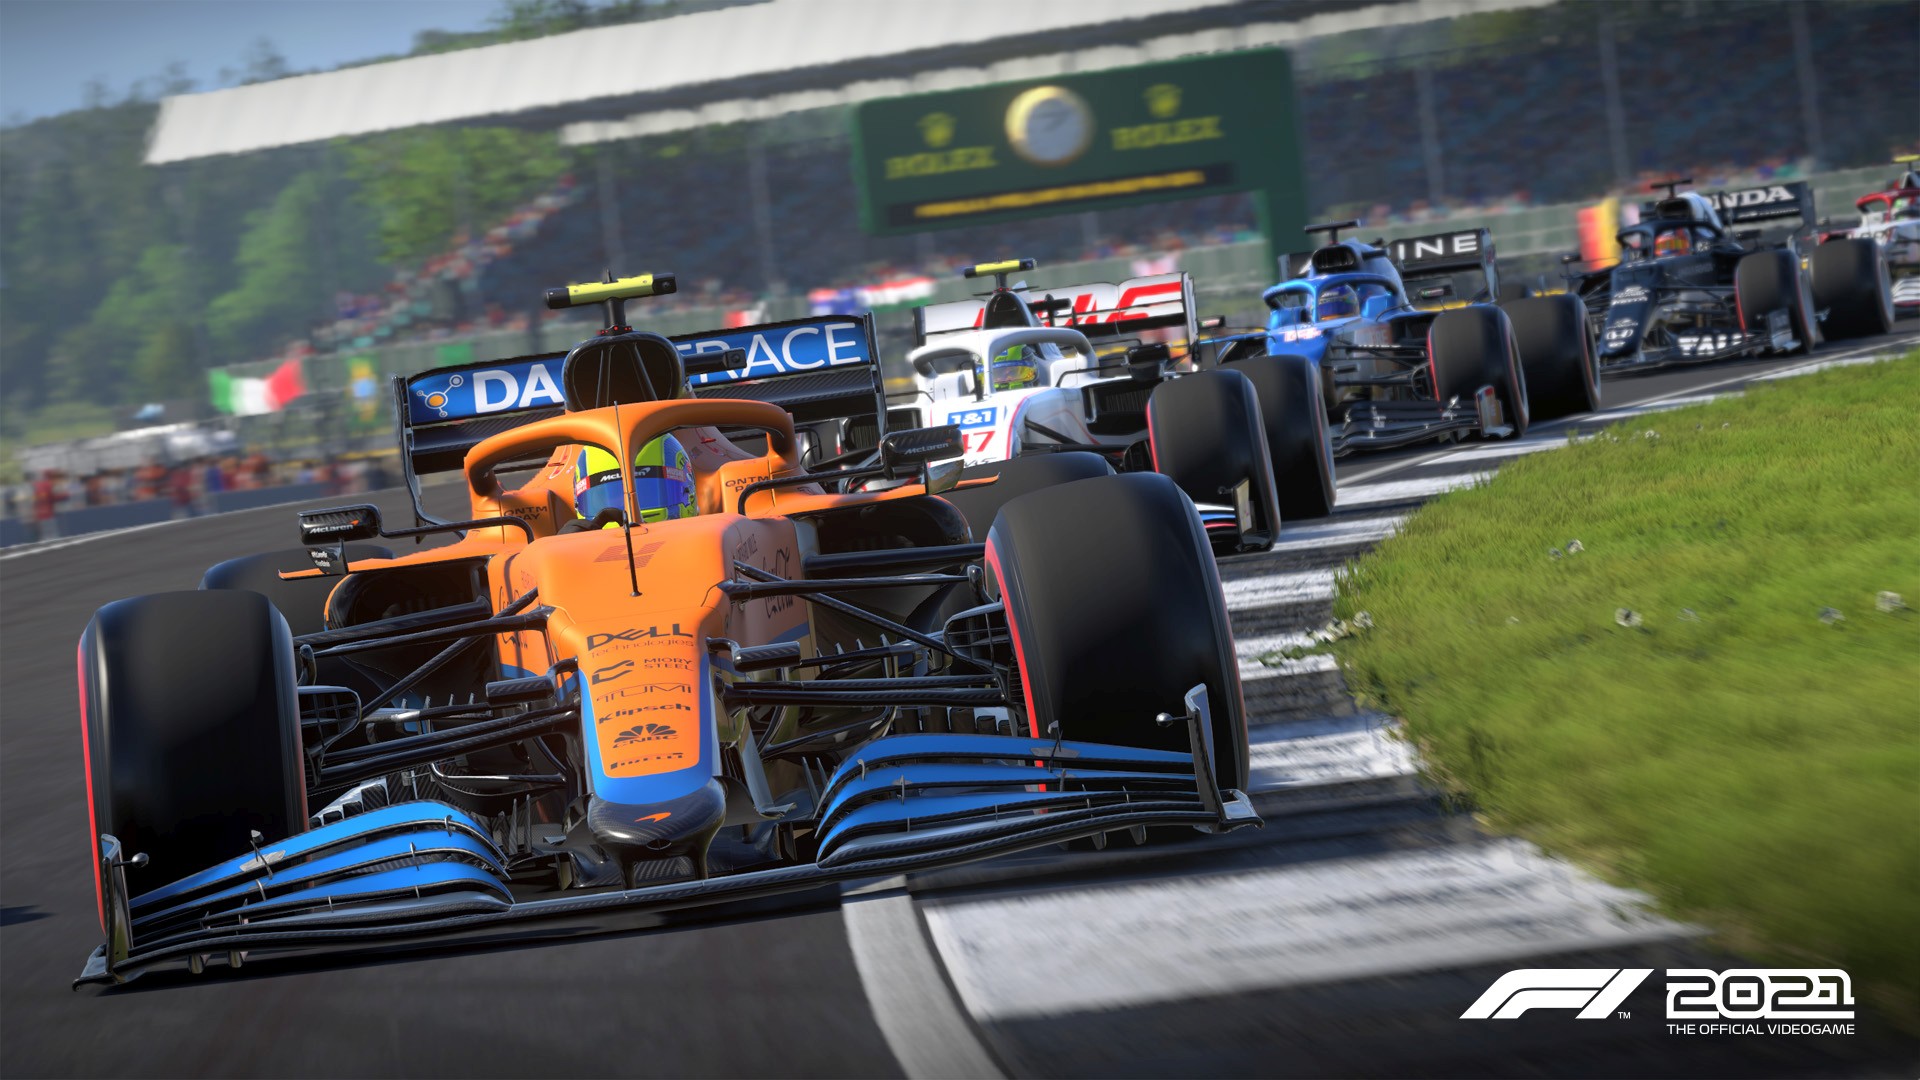 Video For F1 2021 Features Trailer Revealed Bringing You Closer to the Action Than Ever Before